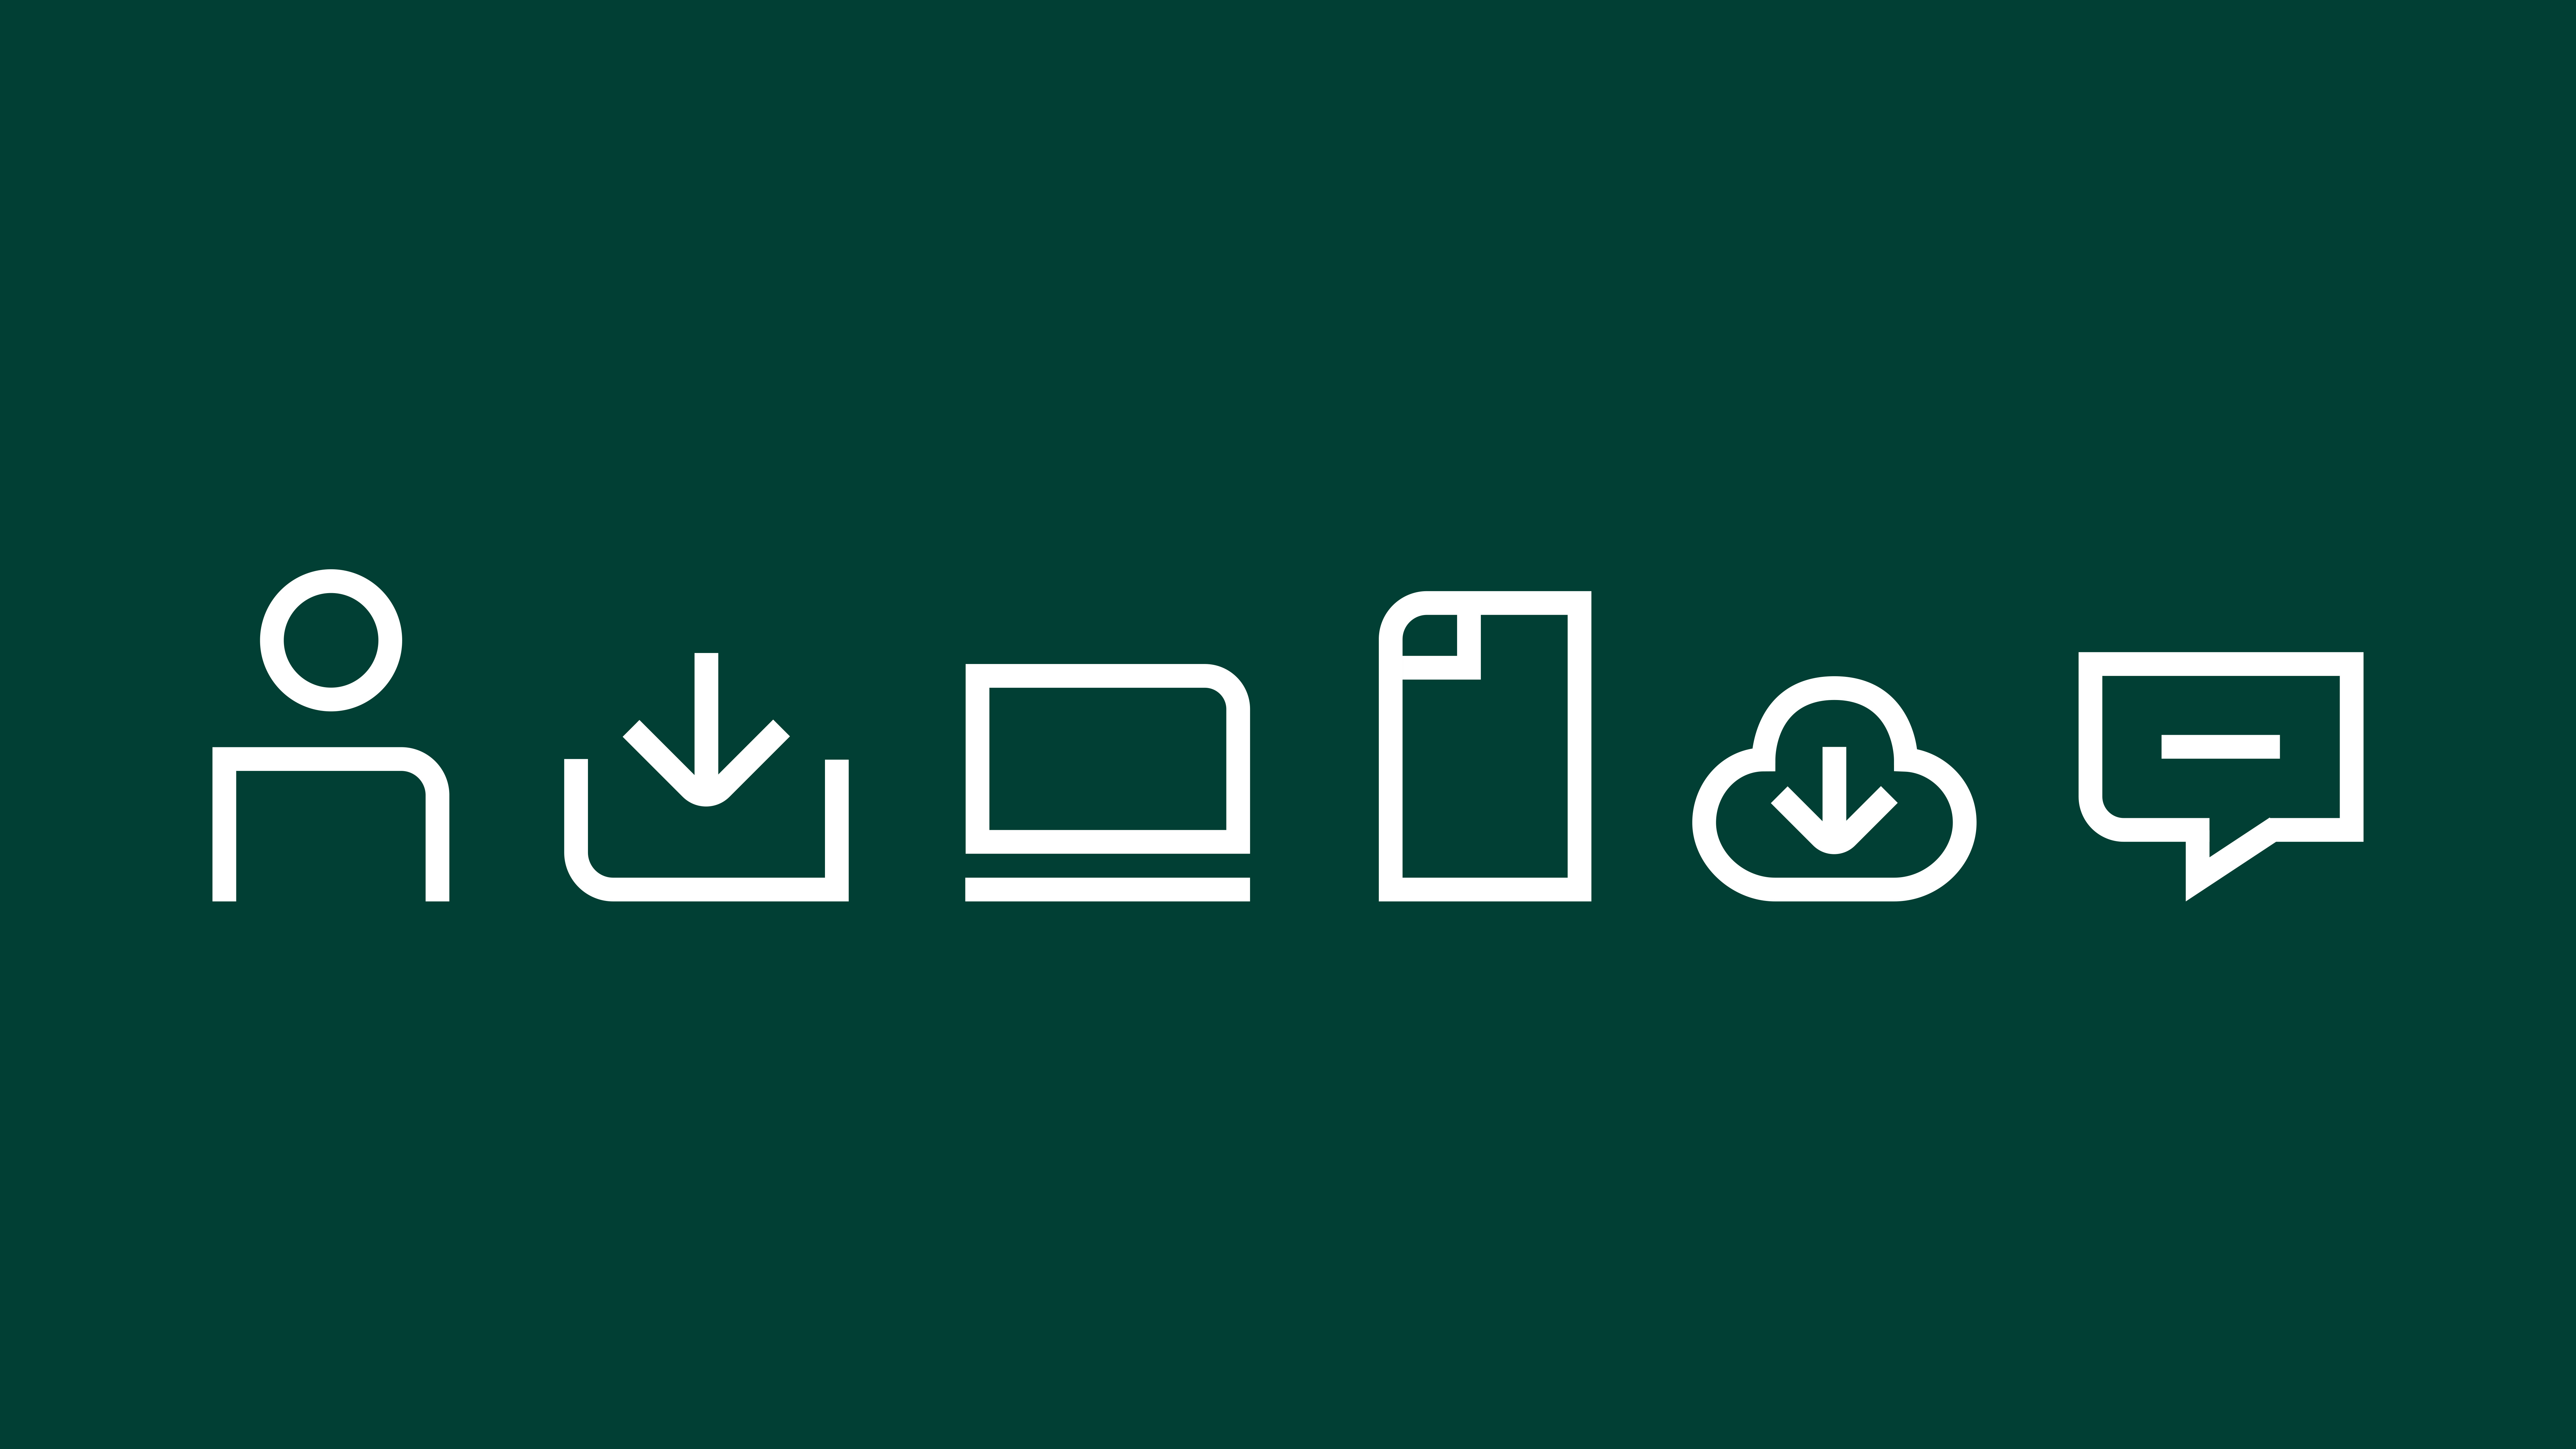 Functional icons